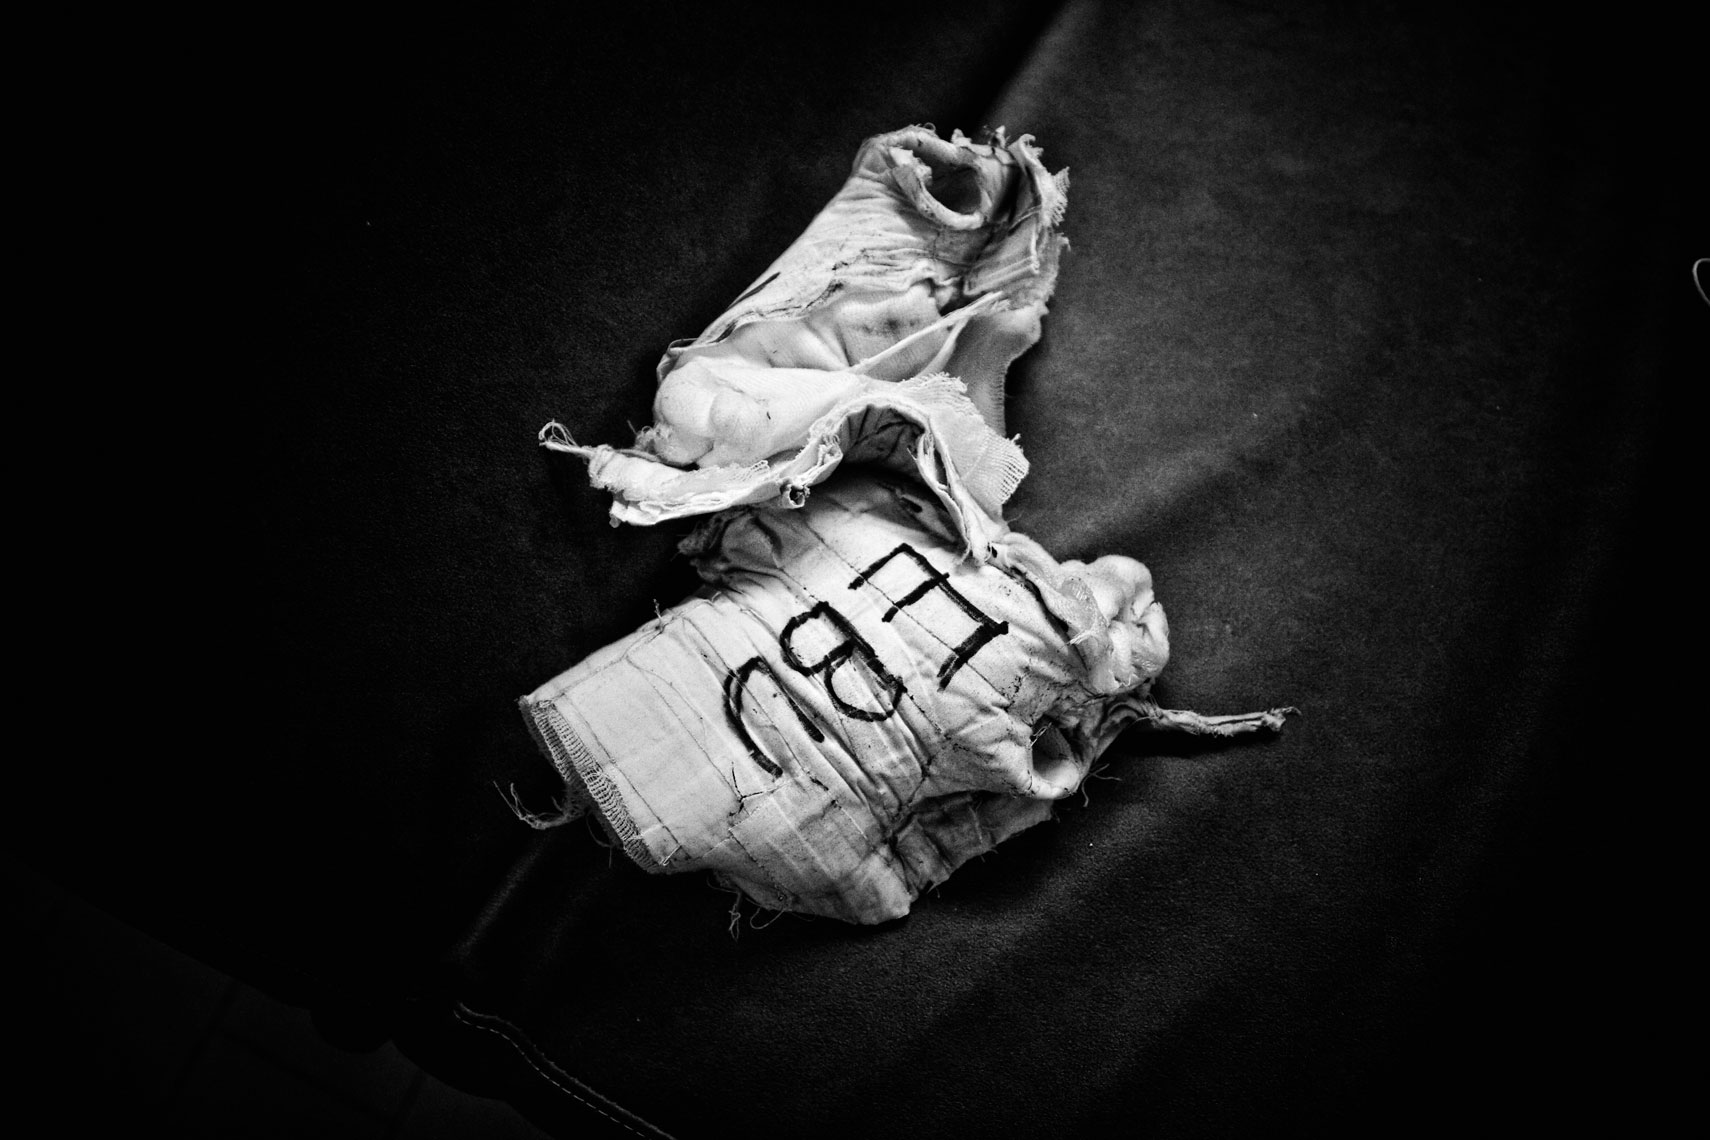 ITALY. Florence, 4th November 2011. Mandela Forum, the night of the match for the EBU (European Boxing Union) Welter Weight crown. After the victory. Leonard Bundu's bandages.